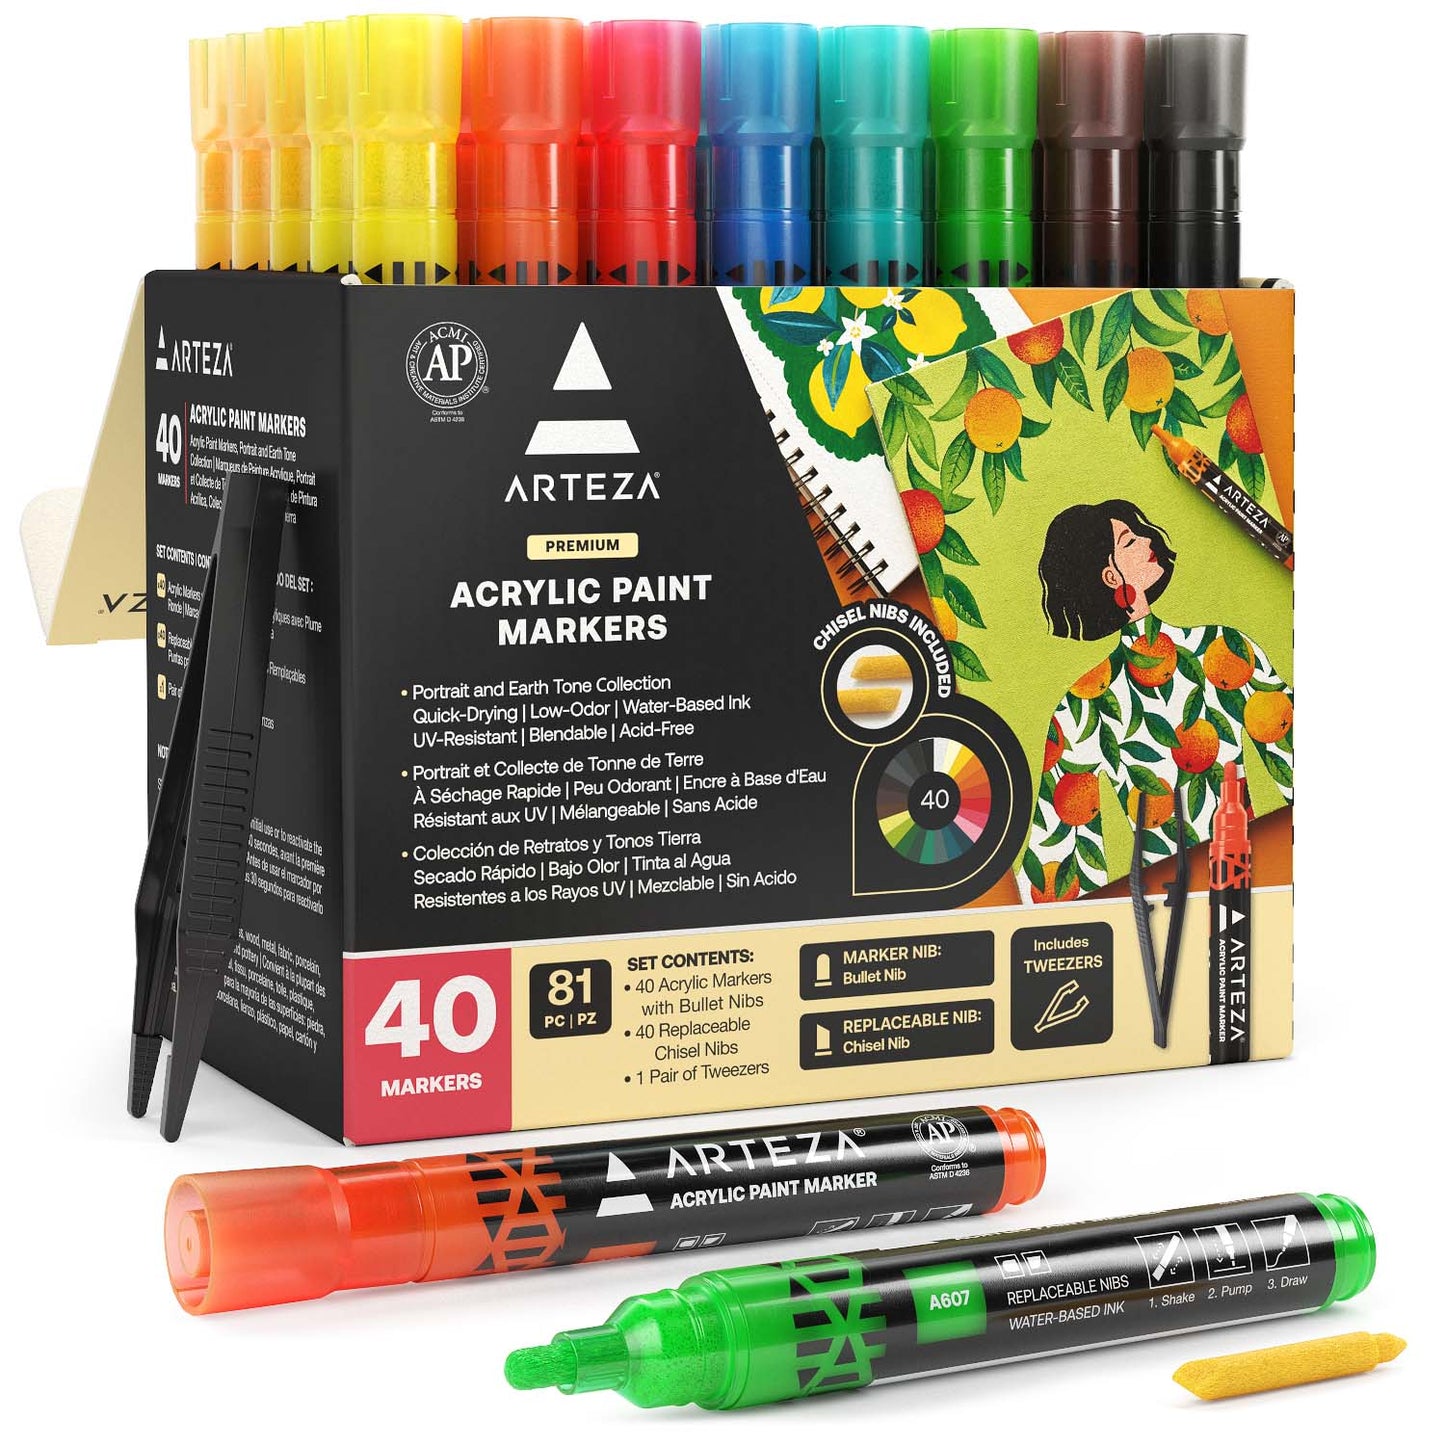 Quirky Artist Loft: Sharpie Paint Markers for Doll Customizing?